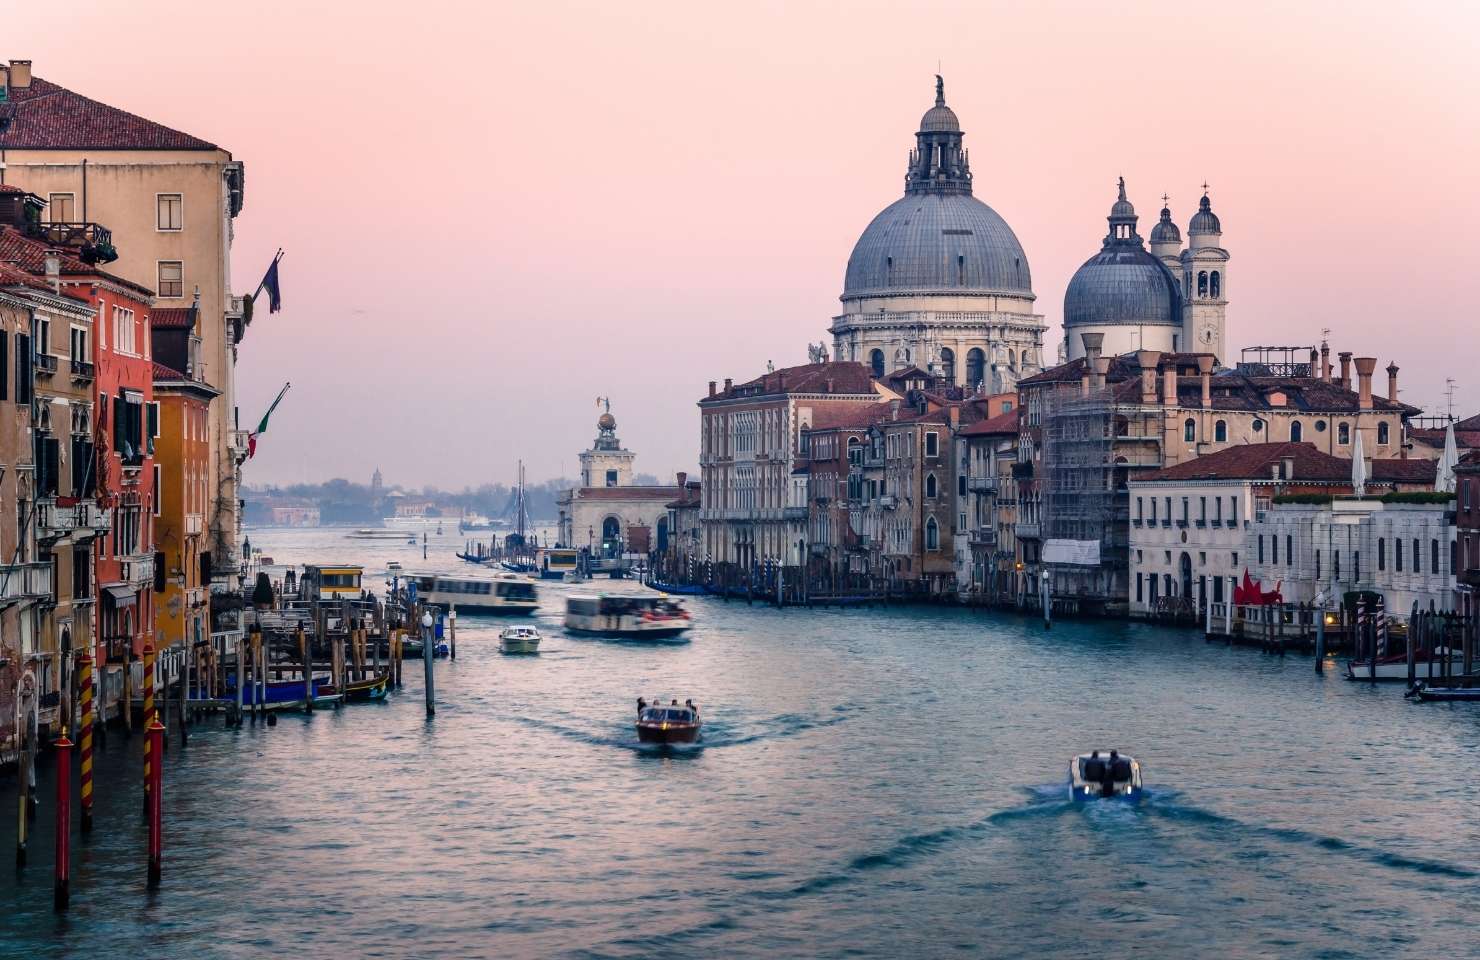 venice italy as one of the winter destinations for couples